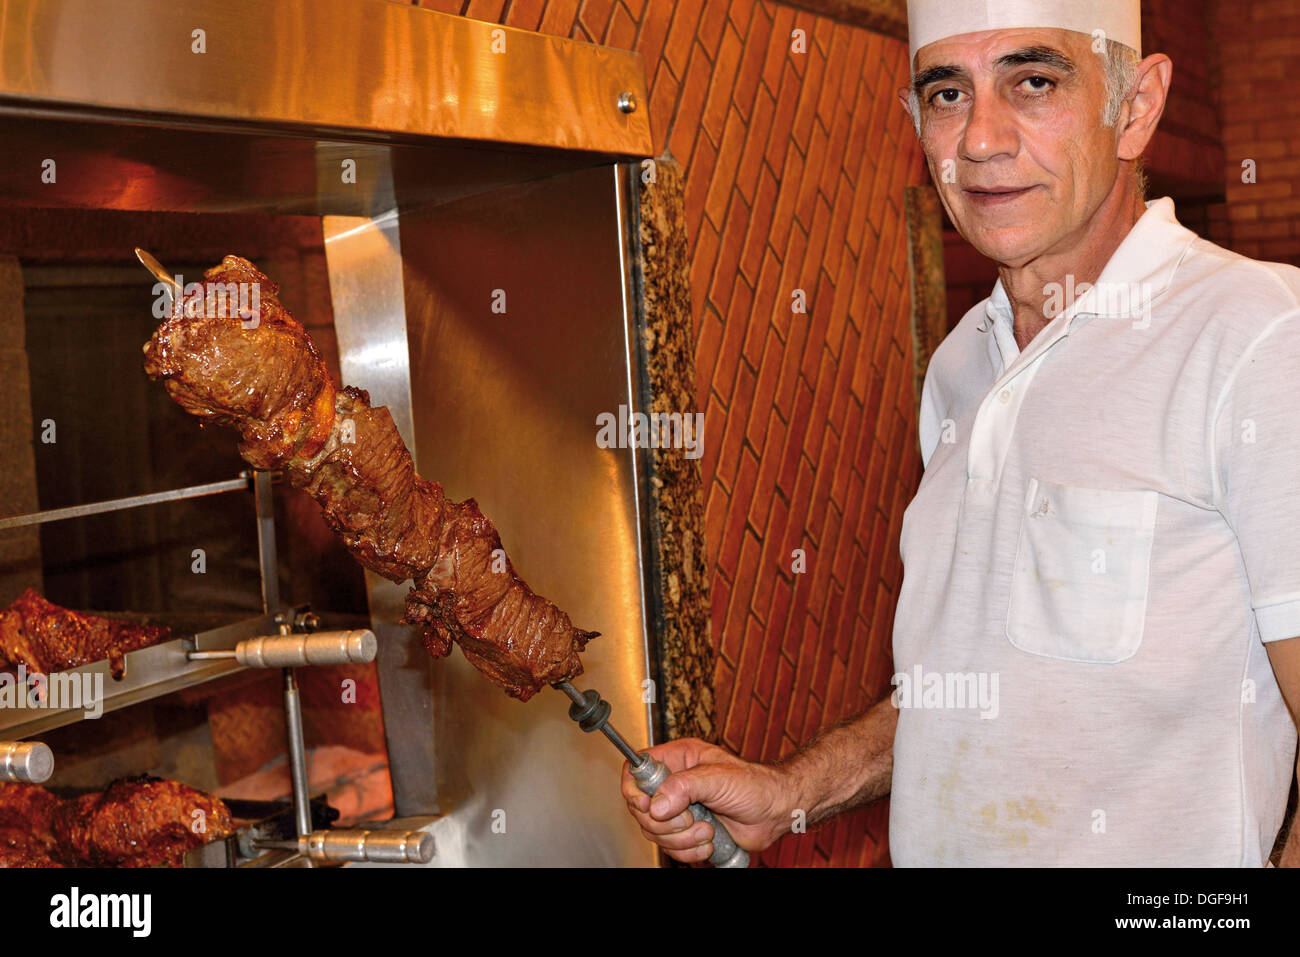 Brazil, Foz do Iguacu: Mr. Afonso showing huge skewer with meat in the grill restaurant Churrascaria Rafain Stock Photo